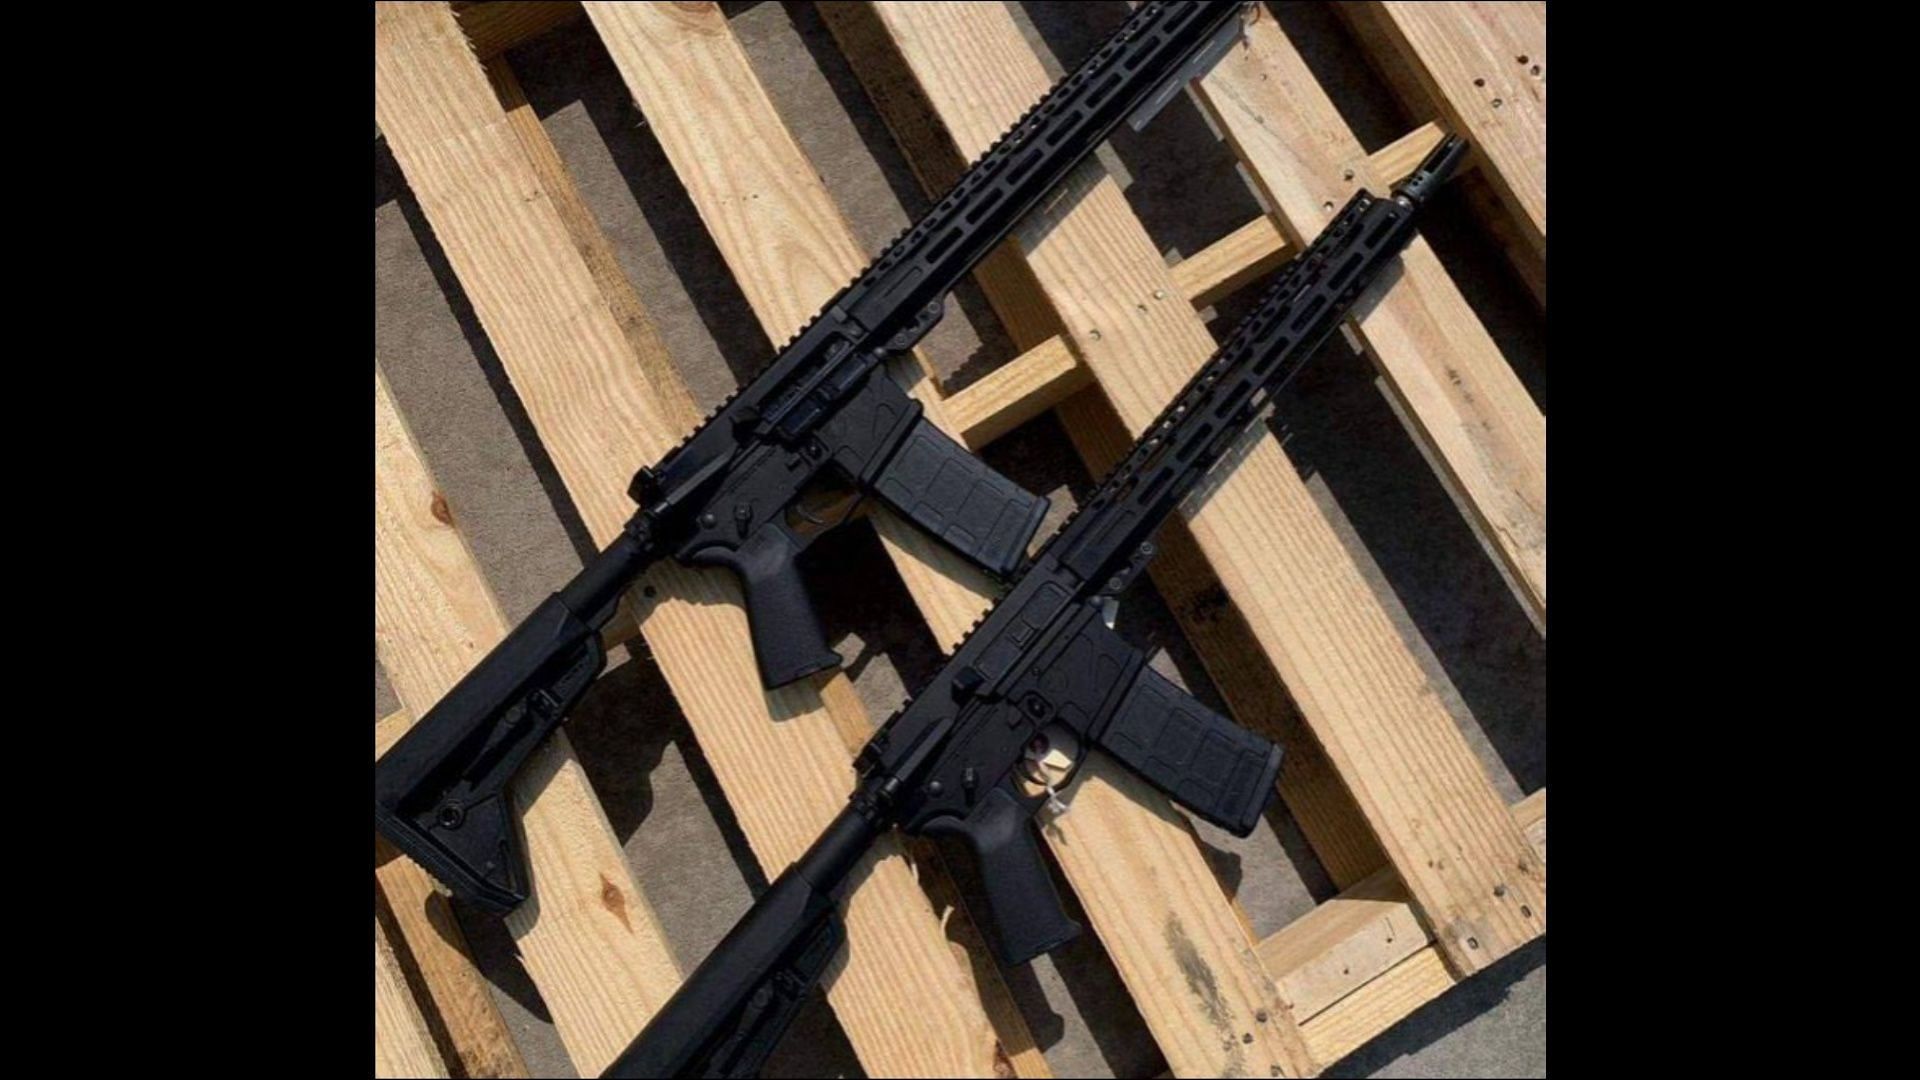 AR-15 is once again in the spotlight after the mass shooting incident at Maine (Image via Rifle16ga/X)